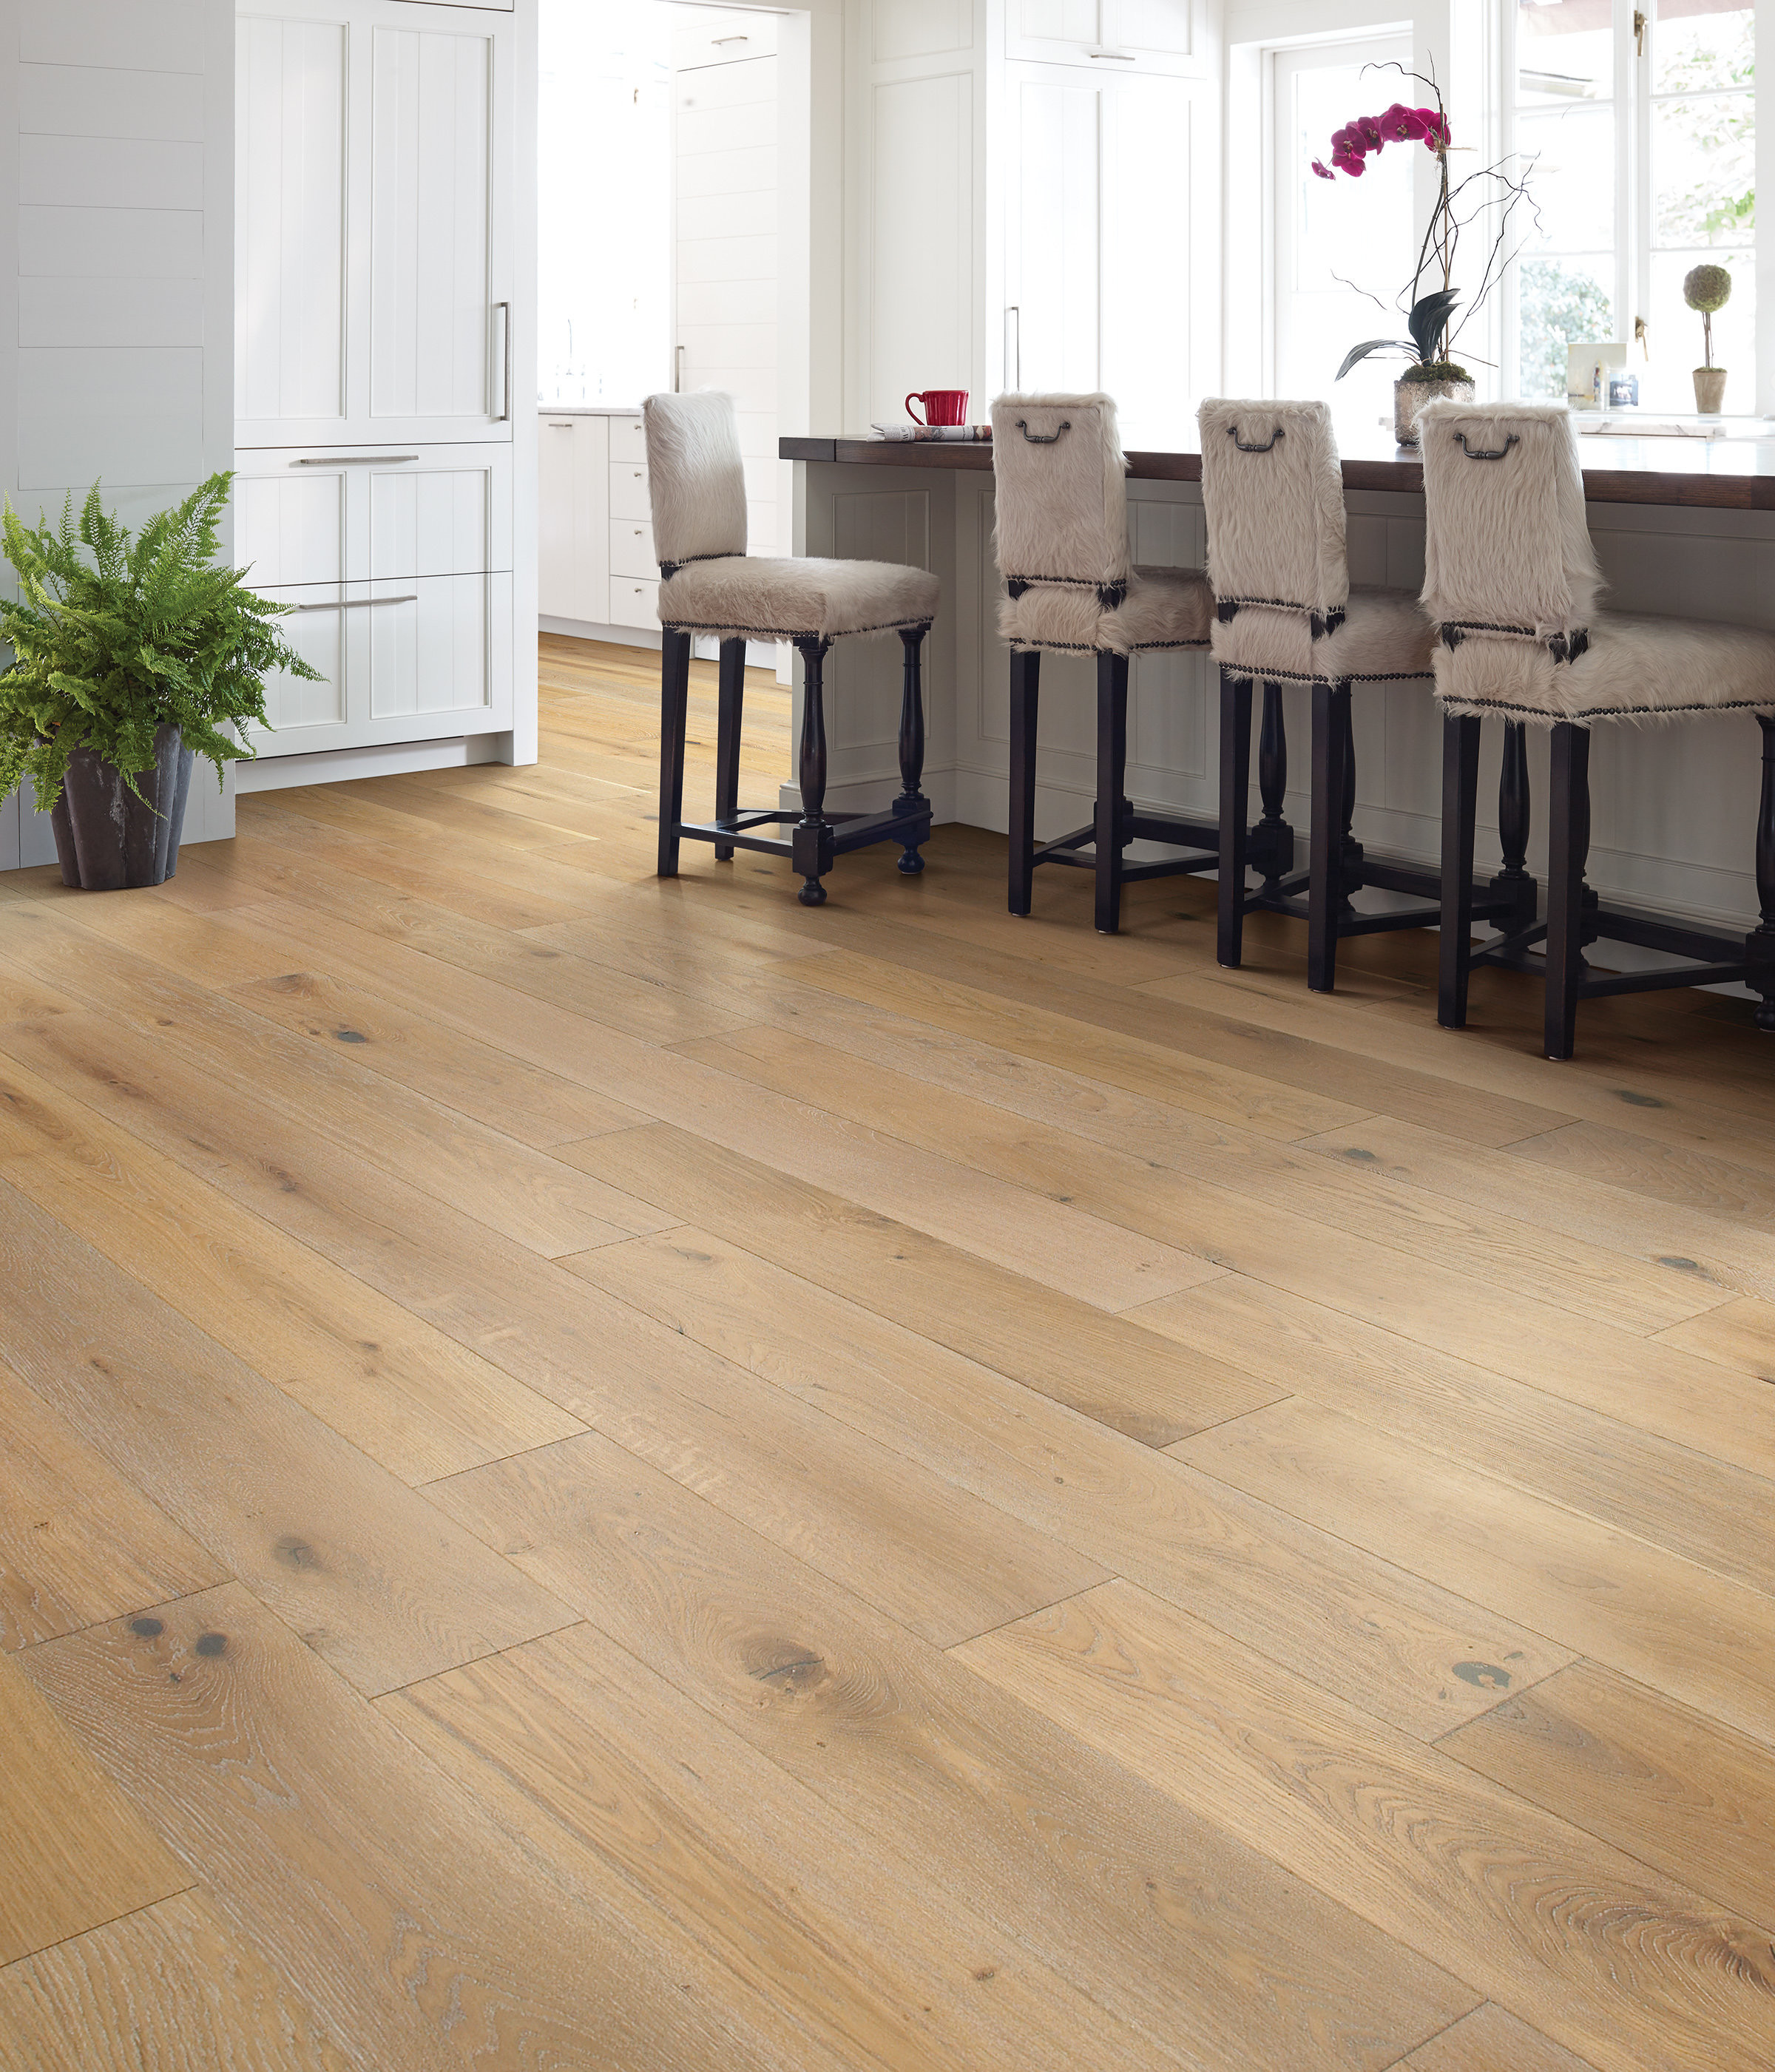 14 Recommended Hardwood Floor Tile Galleria 2024 free download hardwood floor tile galleria of shaw floors com floorta pro the proof is in the pro floor throughout gallery of shaw floors com floorta pro the proof is in the pro